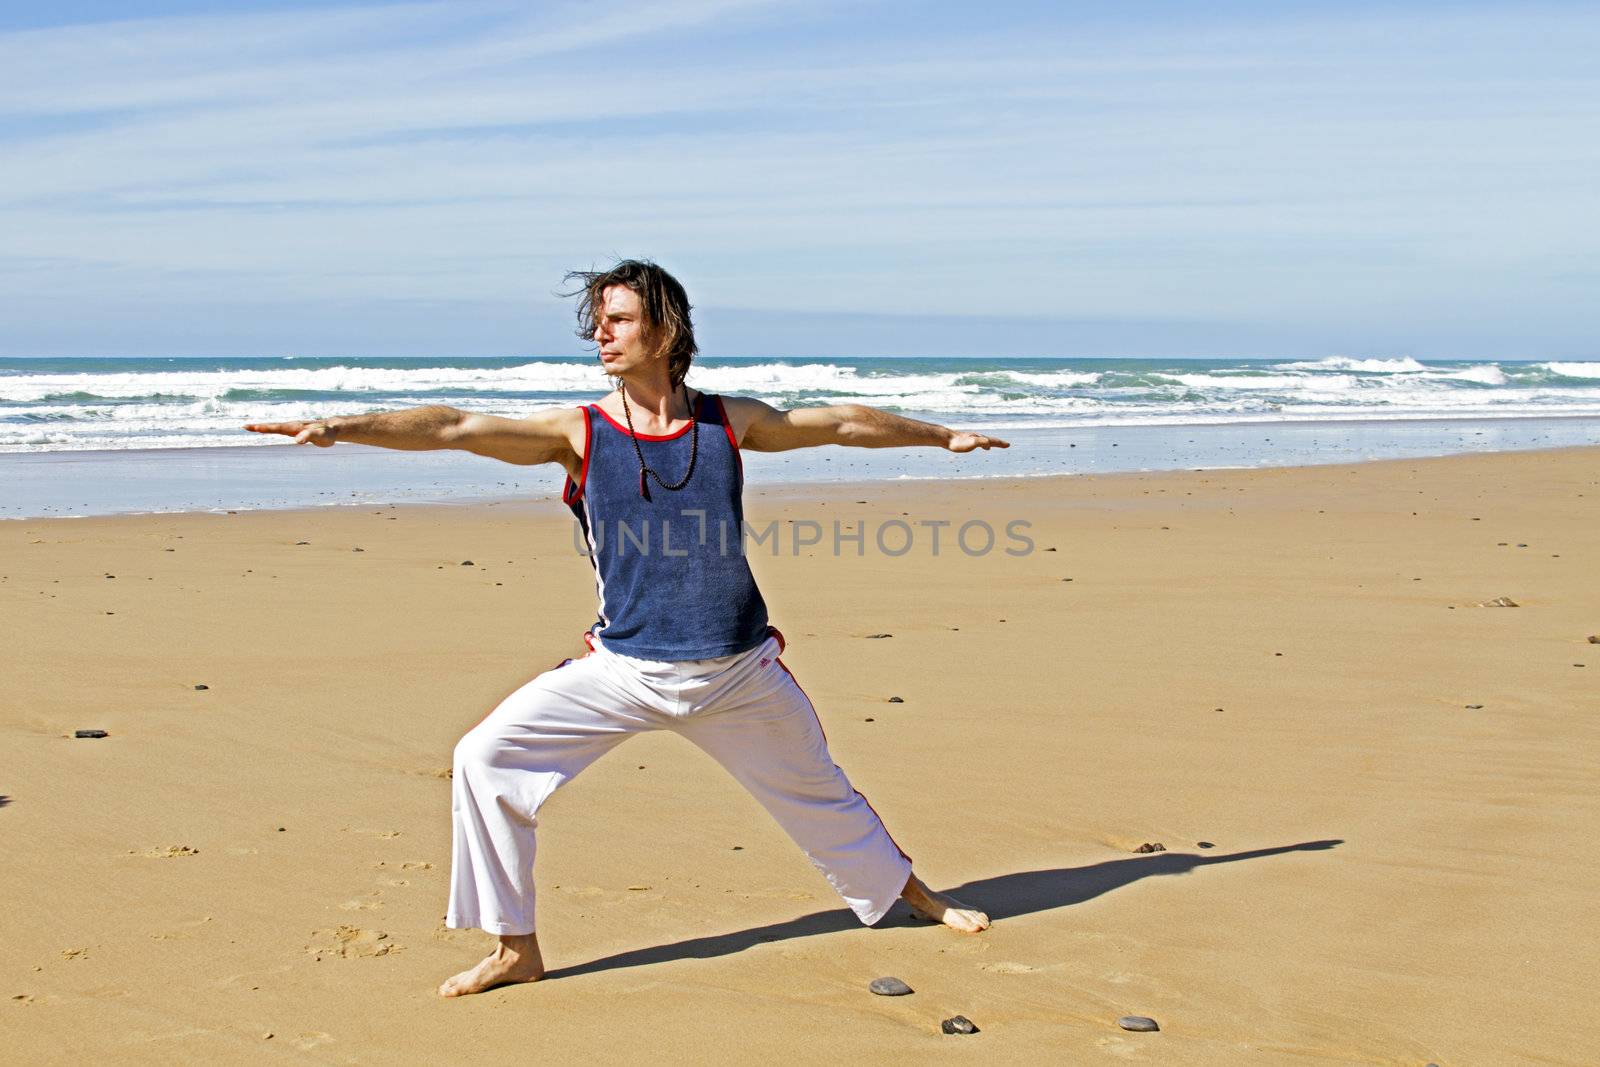 Man doing yoga exercises at the beach